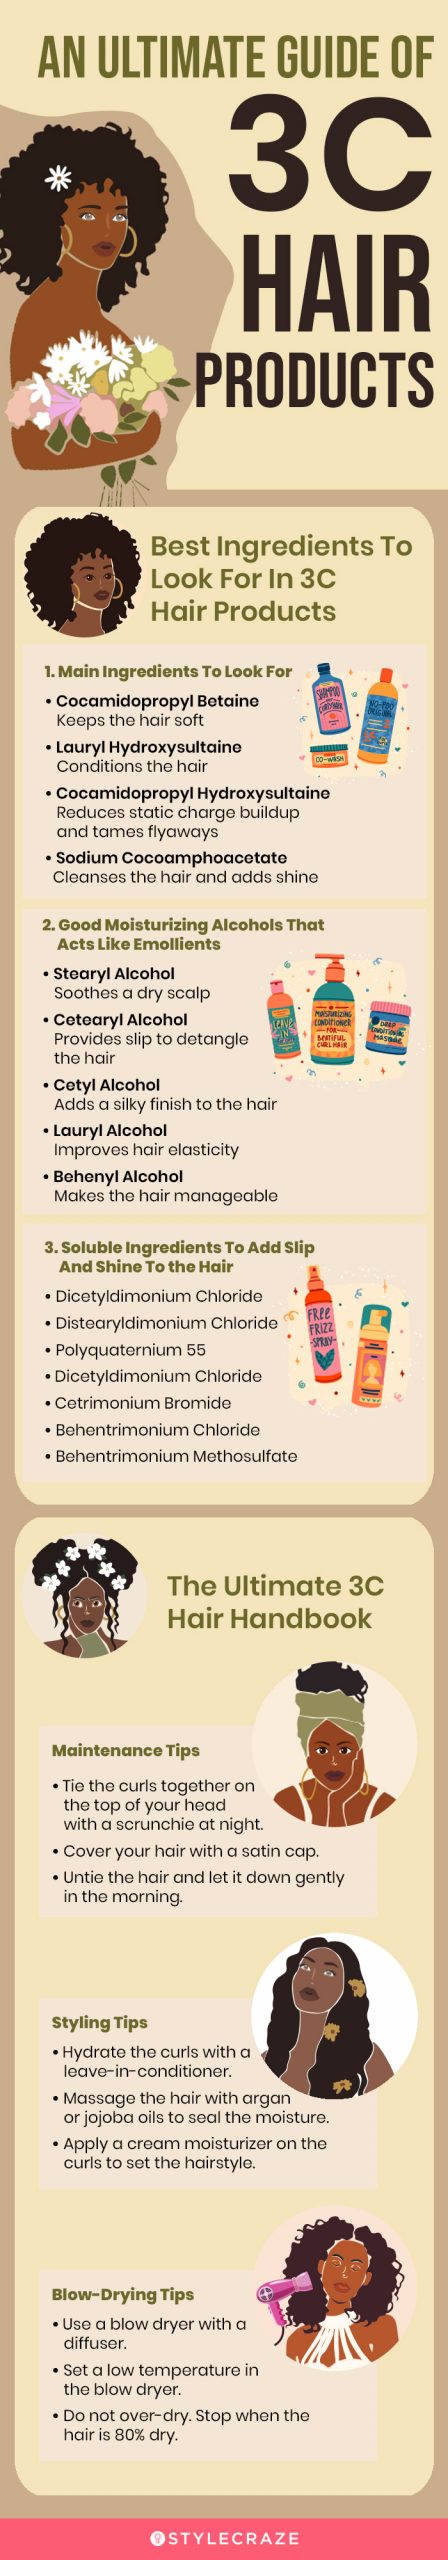 An Ultimate Guide Of 3C Hair Products  [infographic]